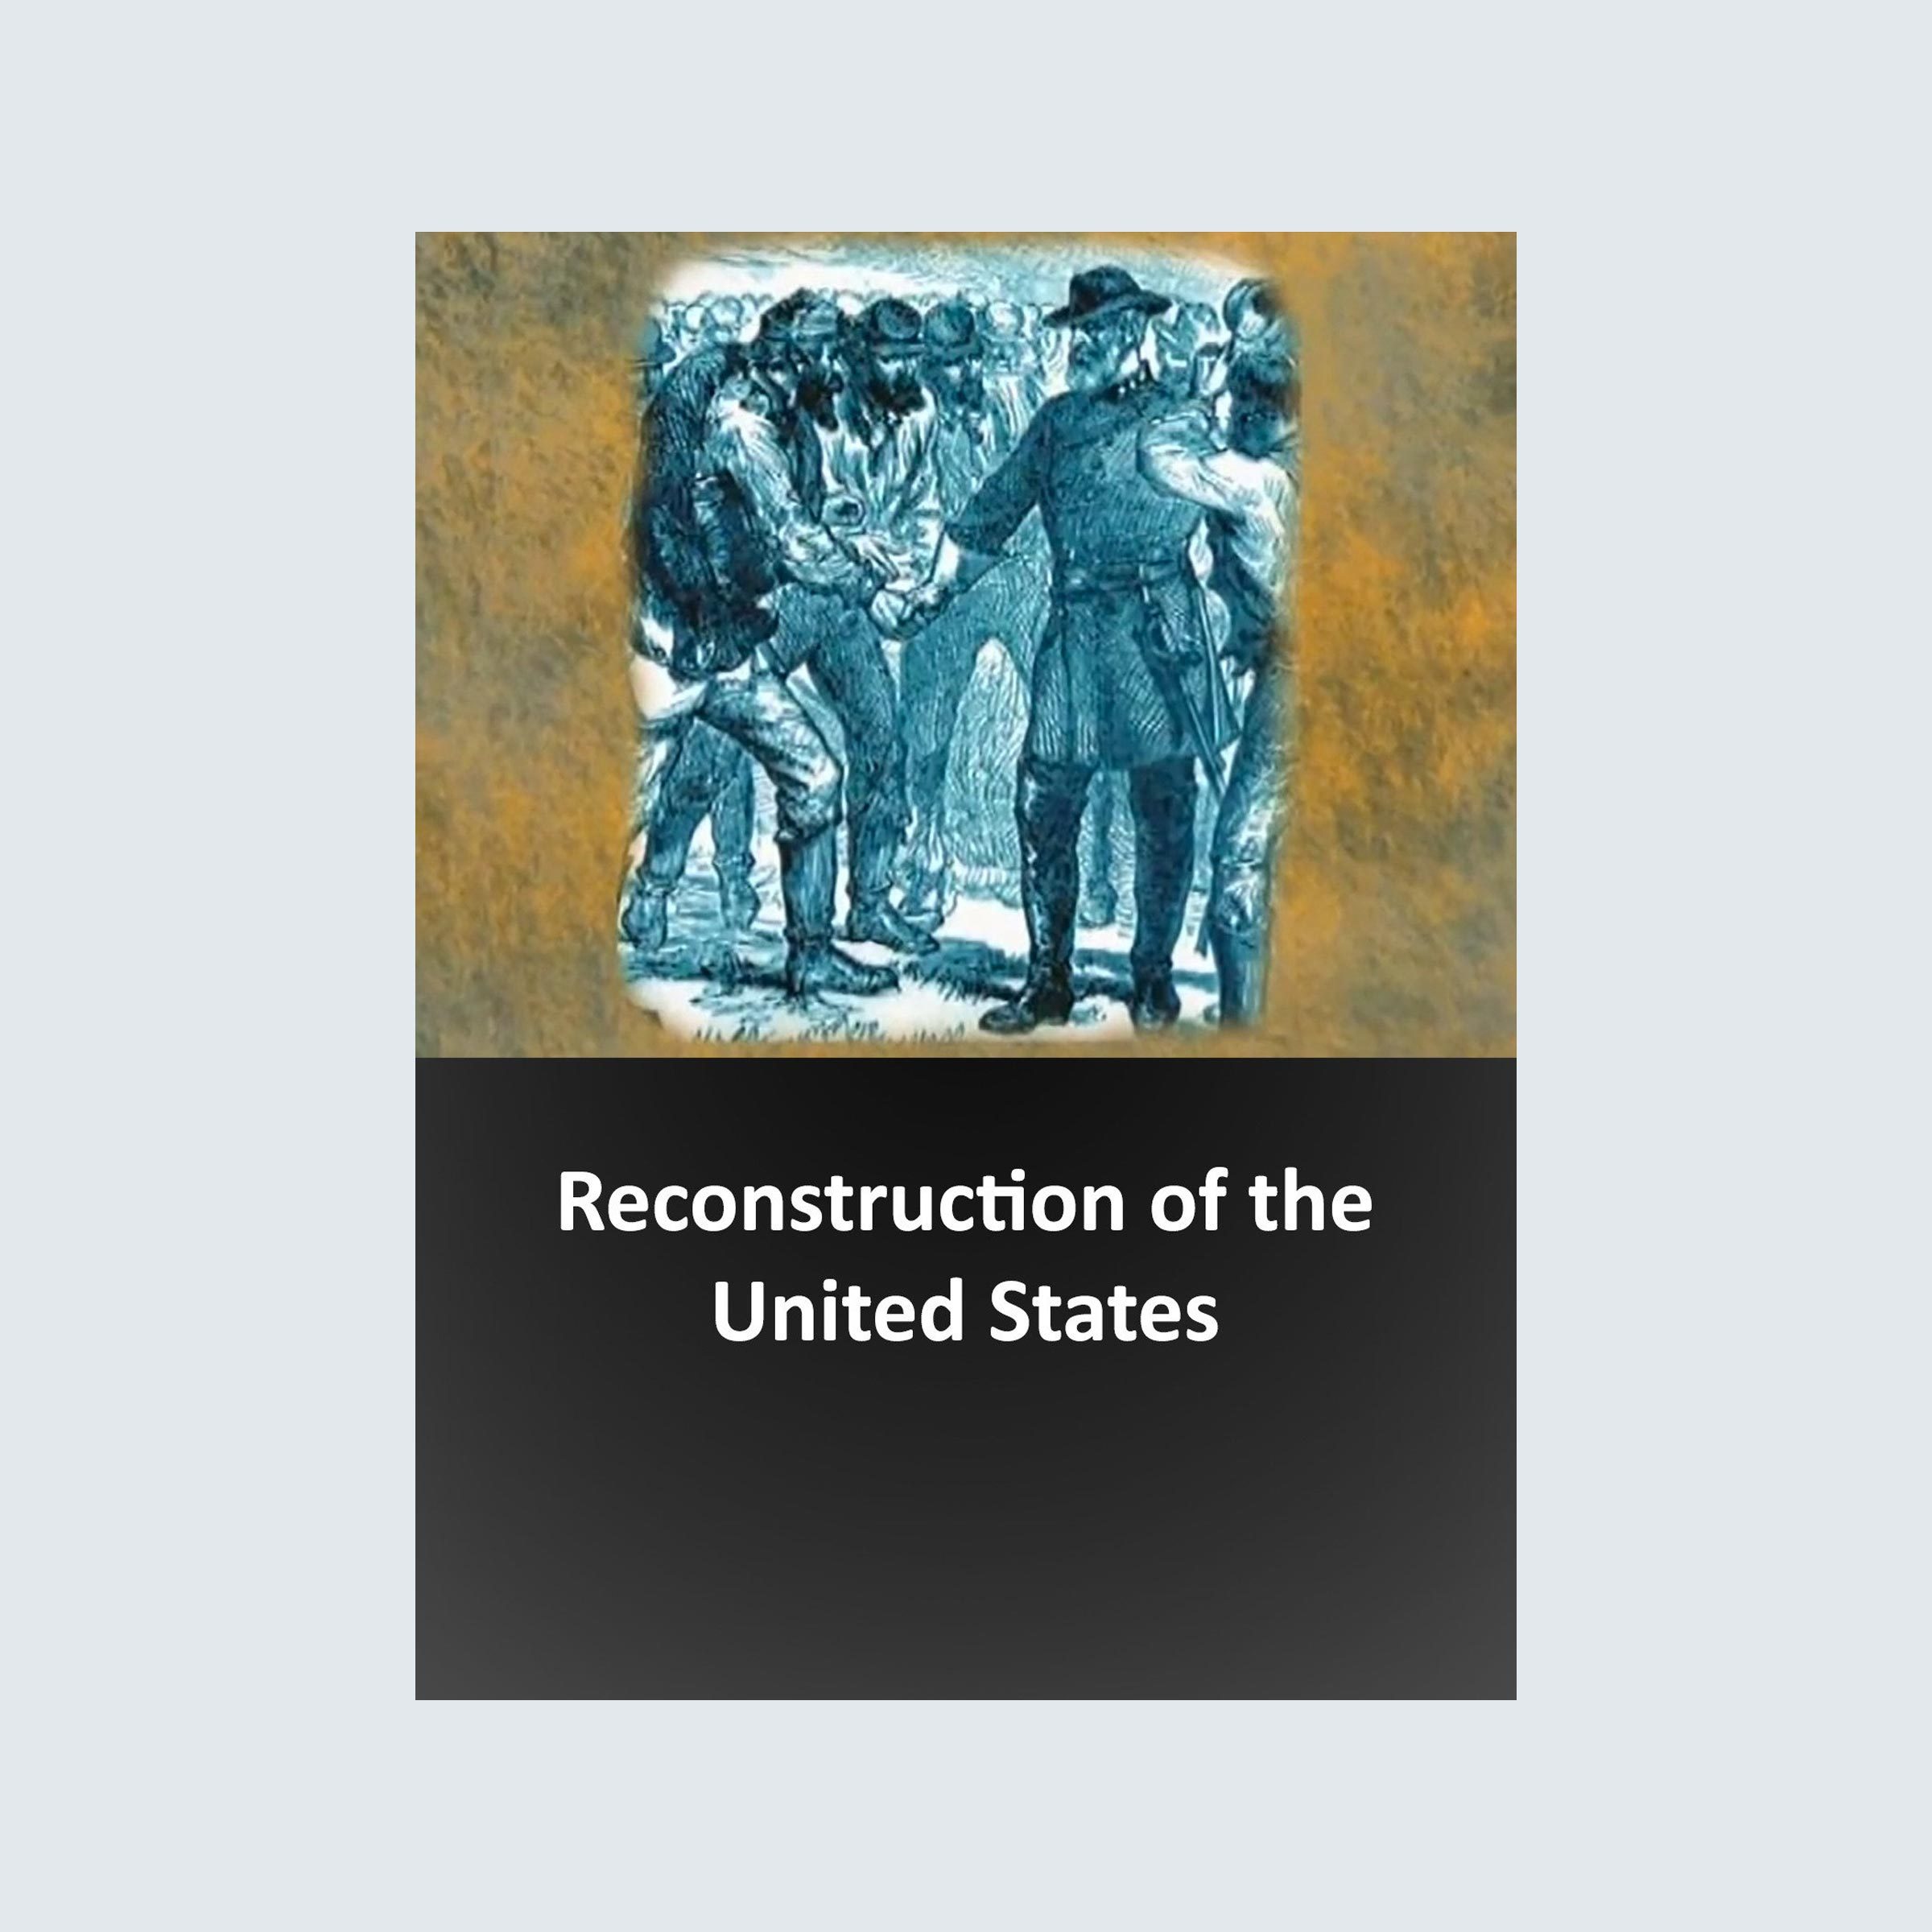 Reconstruction: America after the Civil War